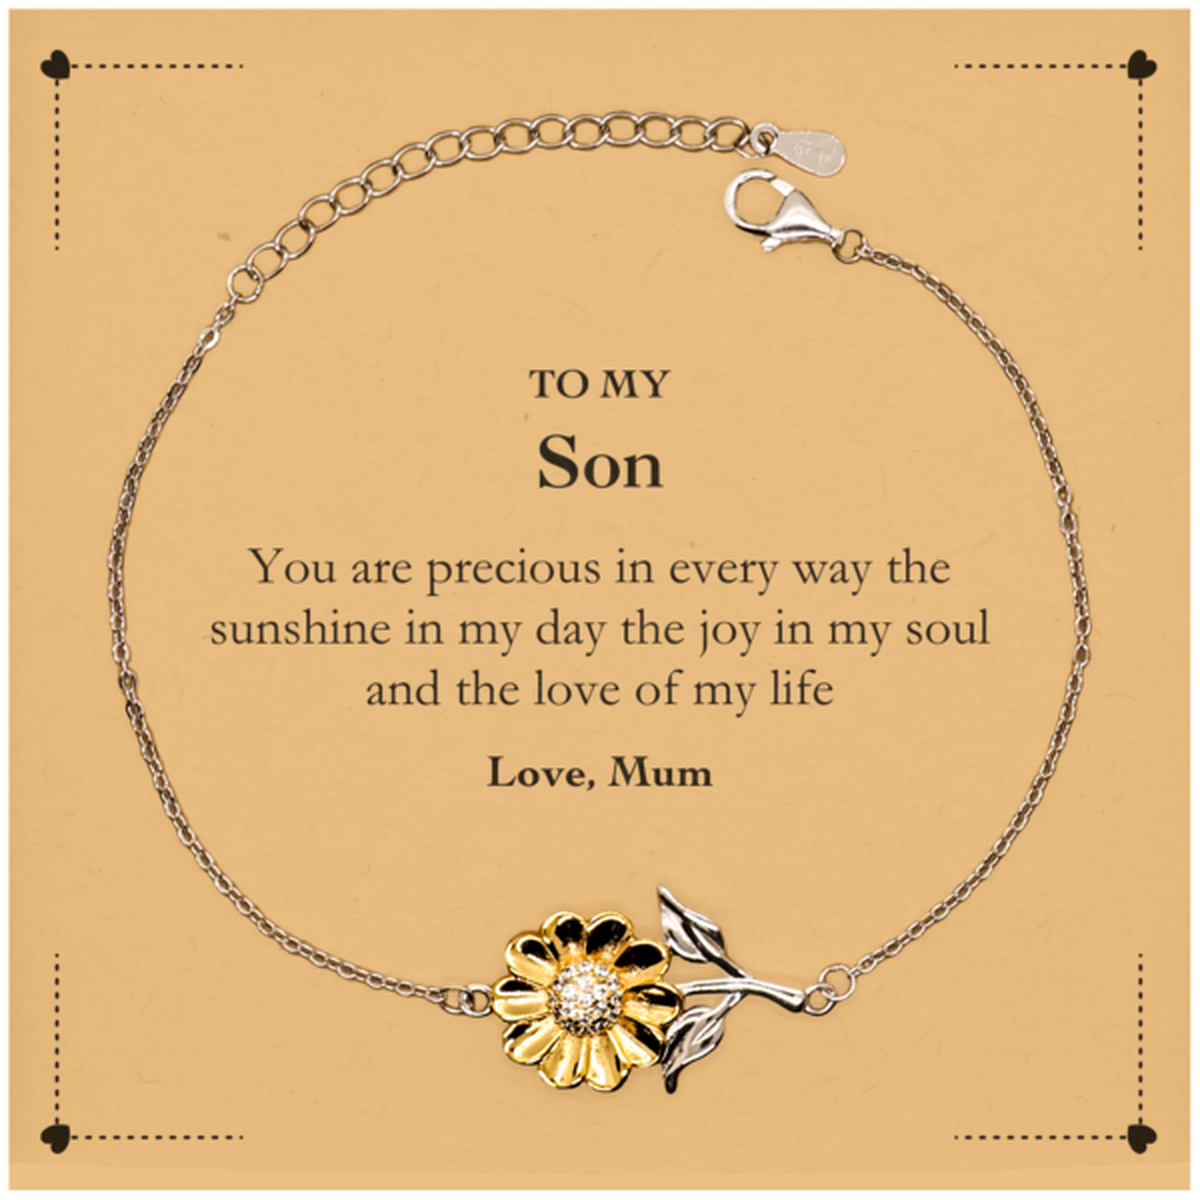 Graduation Gifts for Son Sunflower Bracelet Present from Mum, Christmas Son Birthday Gifts Son You are precious in every way the sunshine in my day. Love, Mum